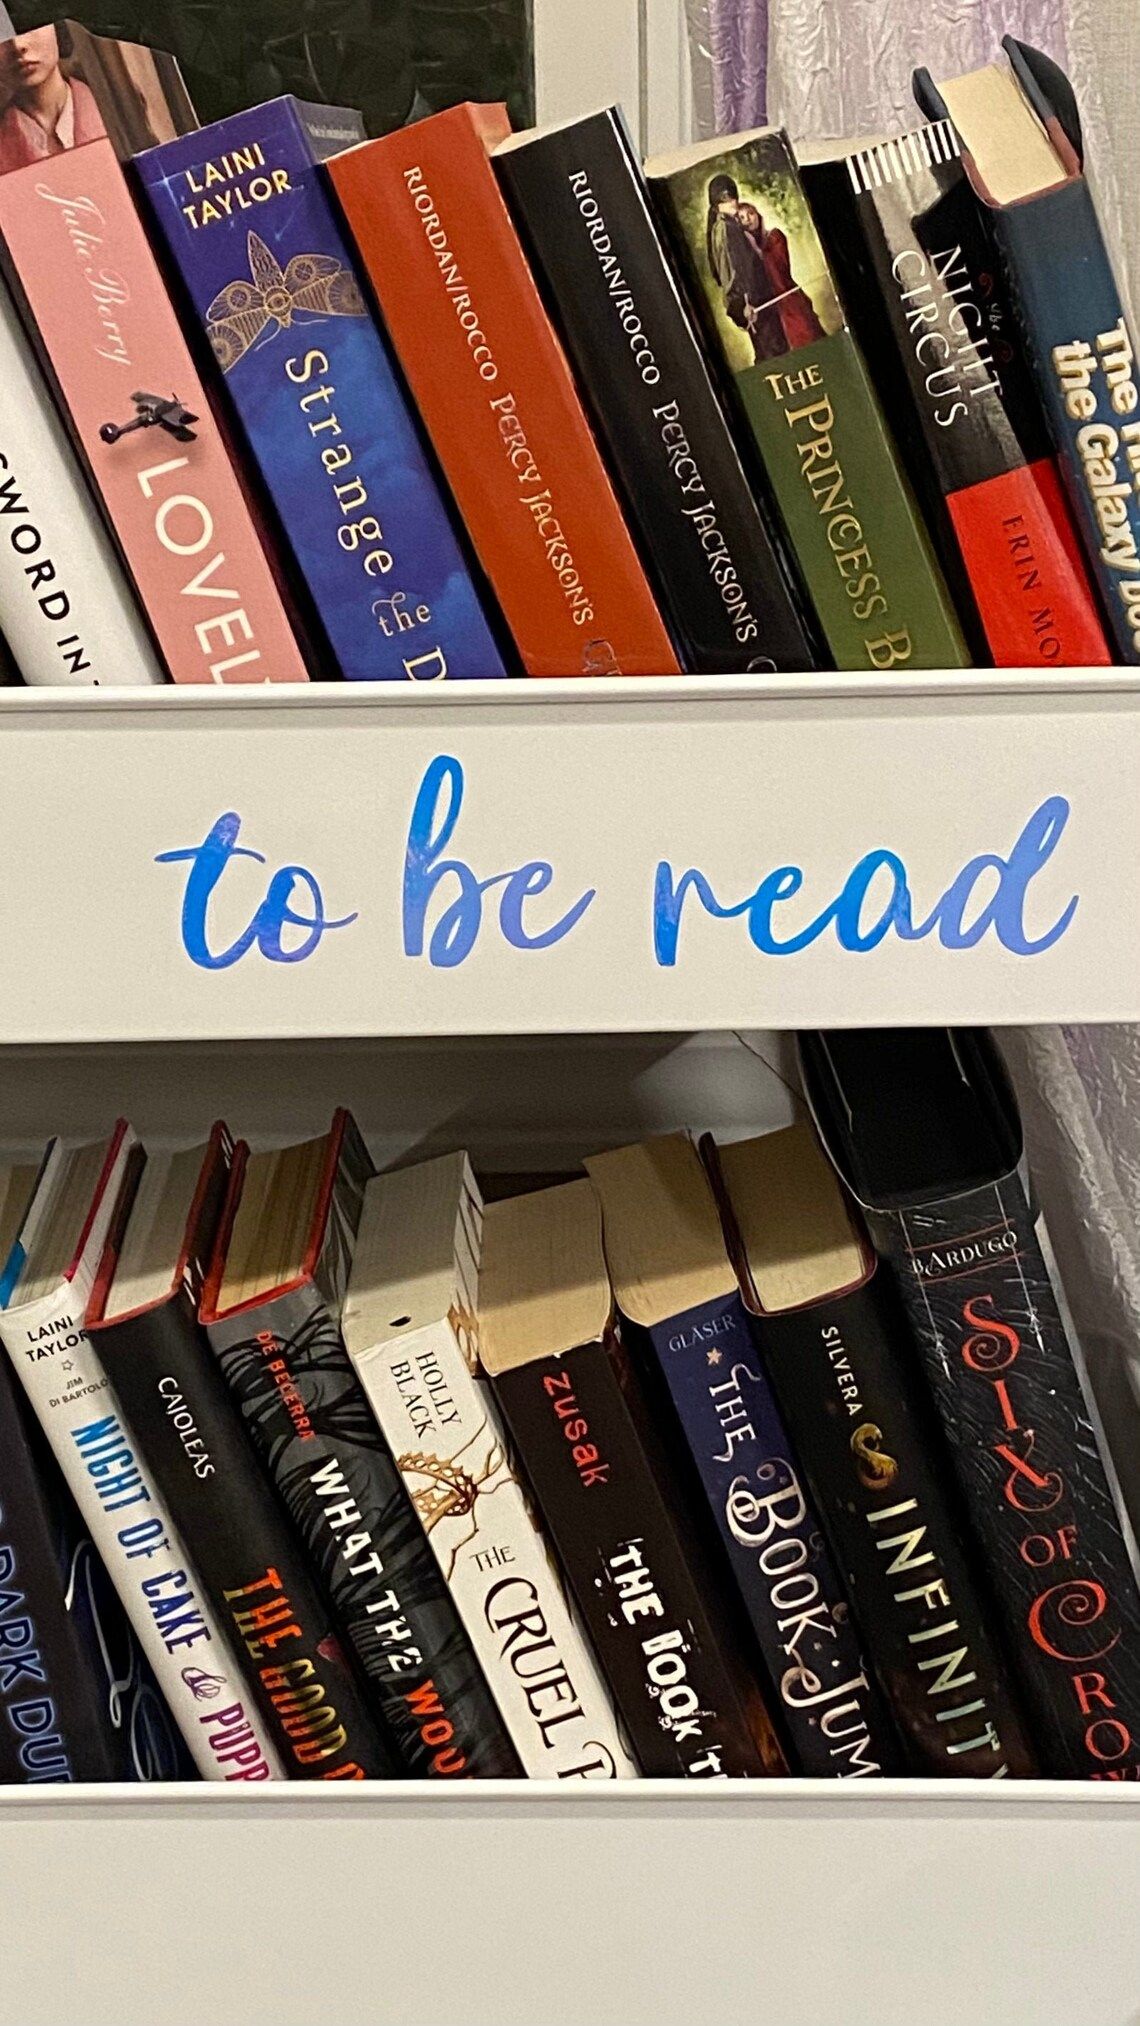 to be read vinyl sticker on rolling cart with books in it